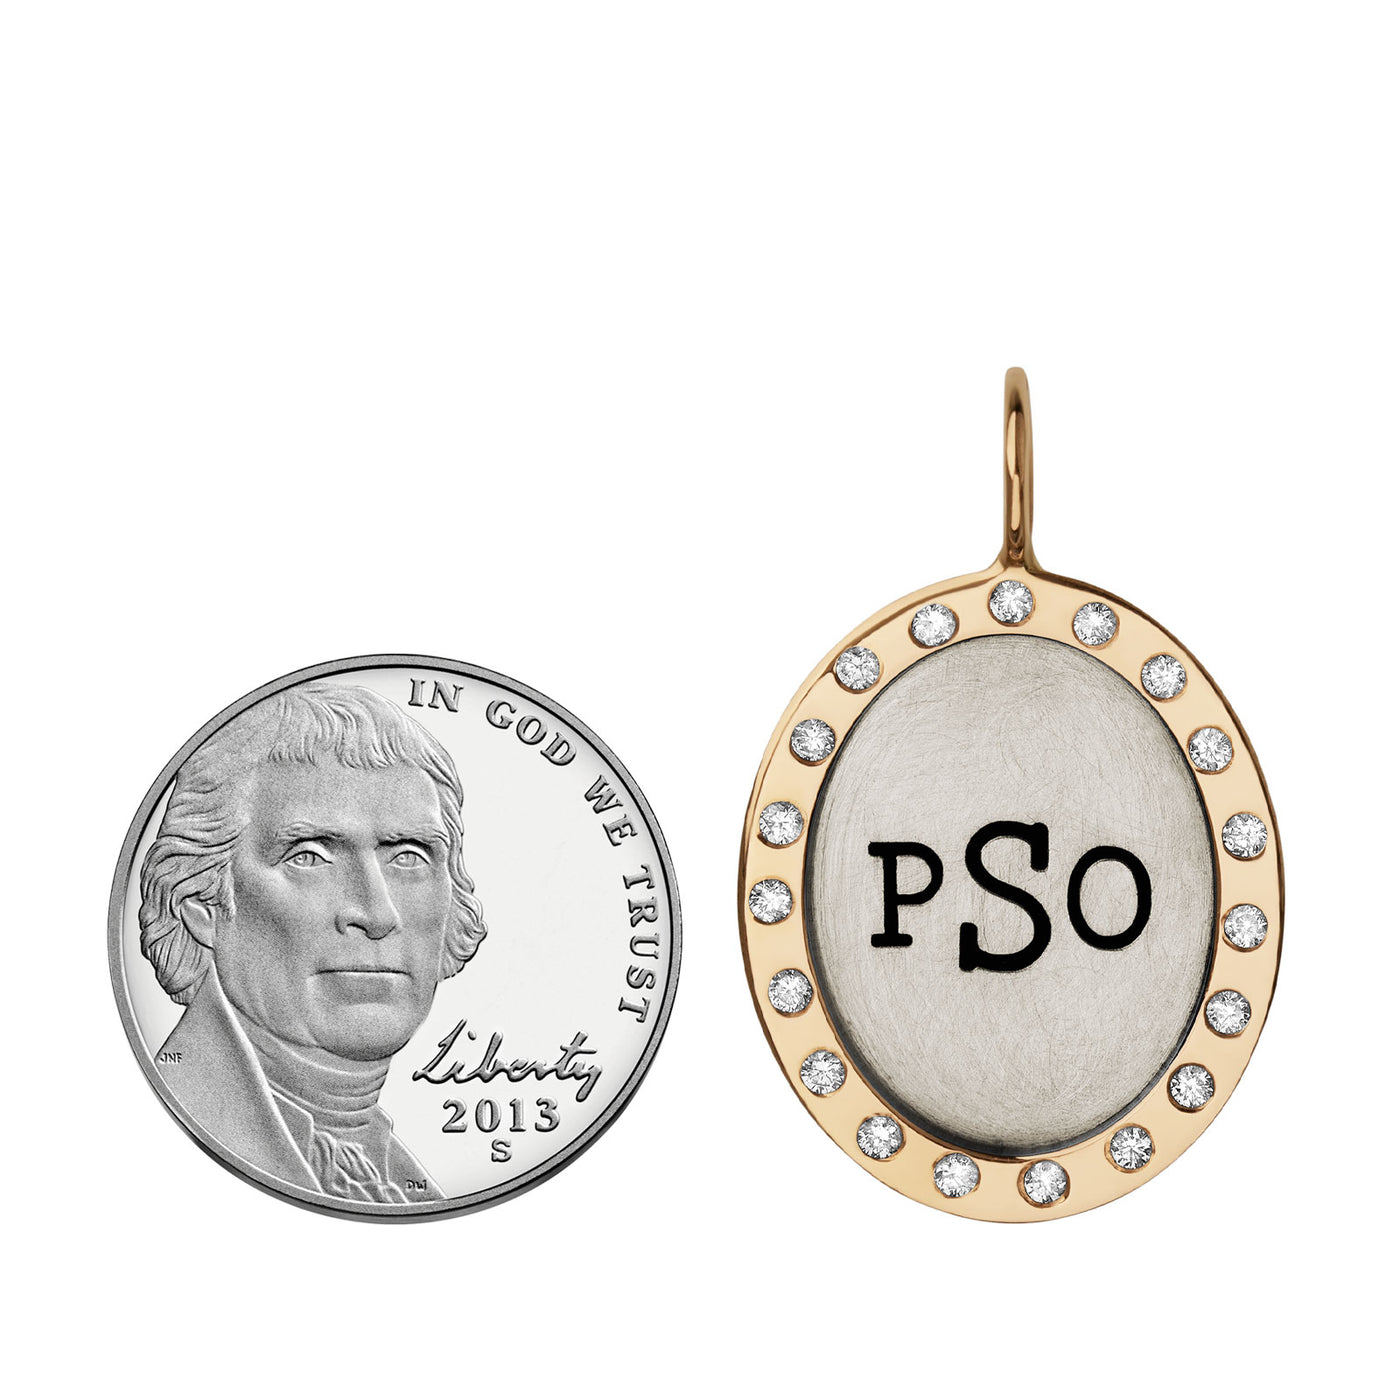 Oval charm size compared to a quarter